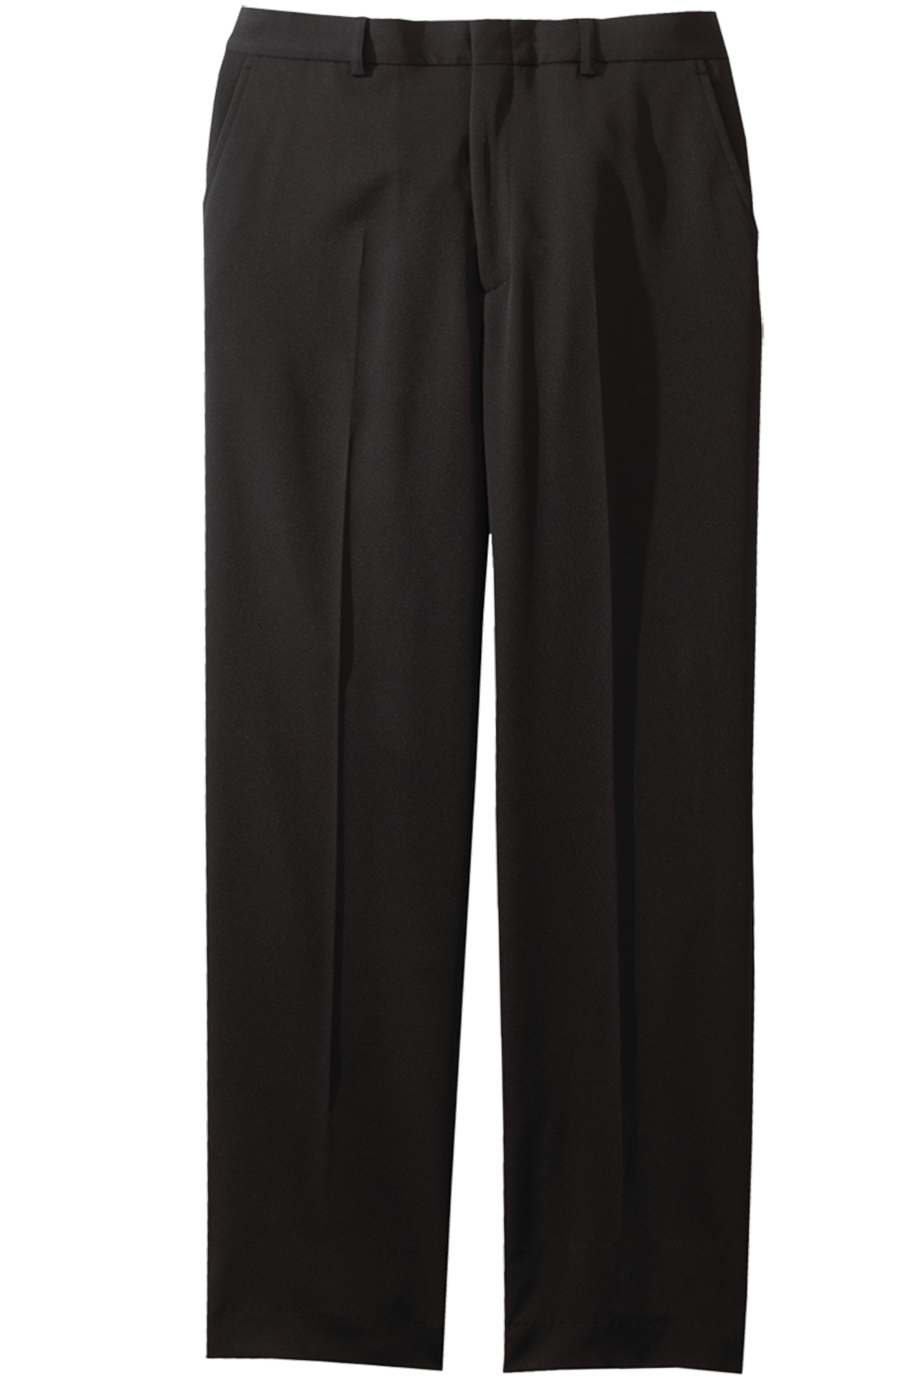 Edwards Big & Tall  Classic Fit Trouser Pant - Online Exclusive